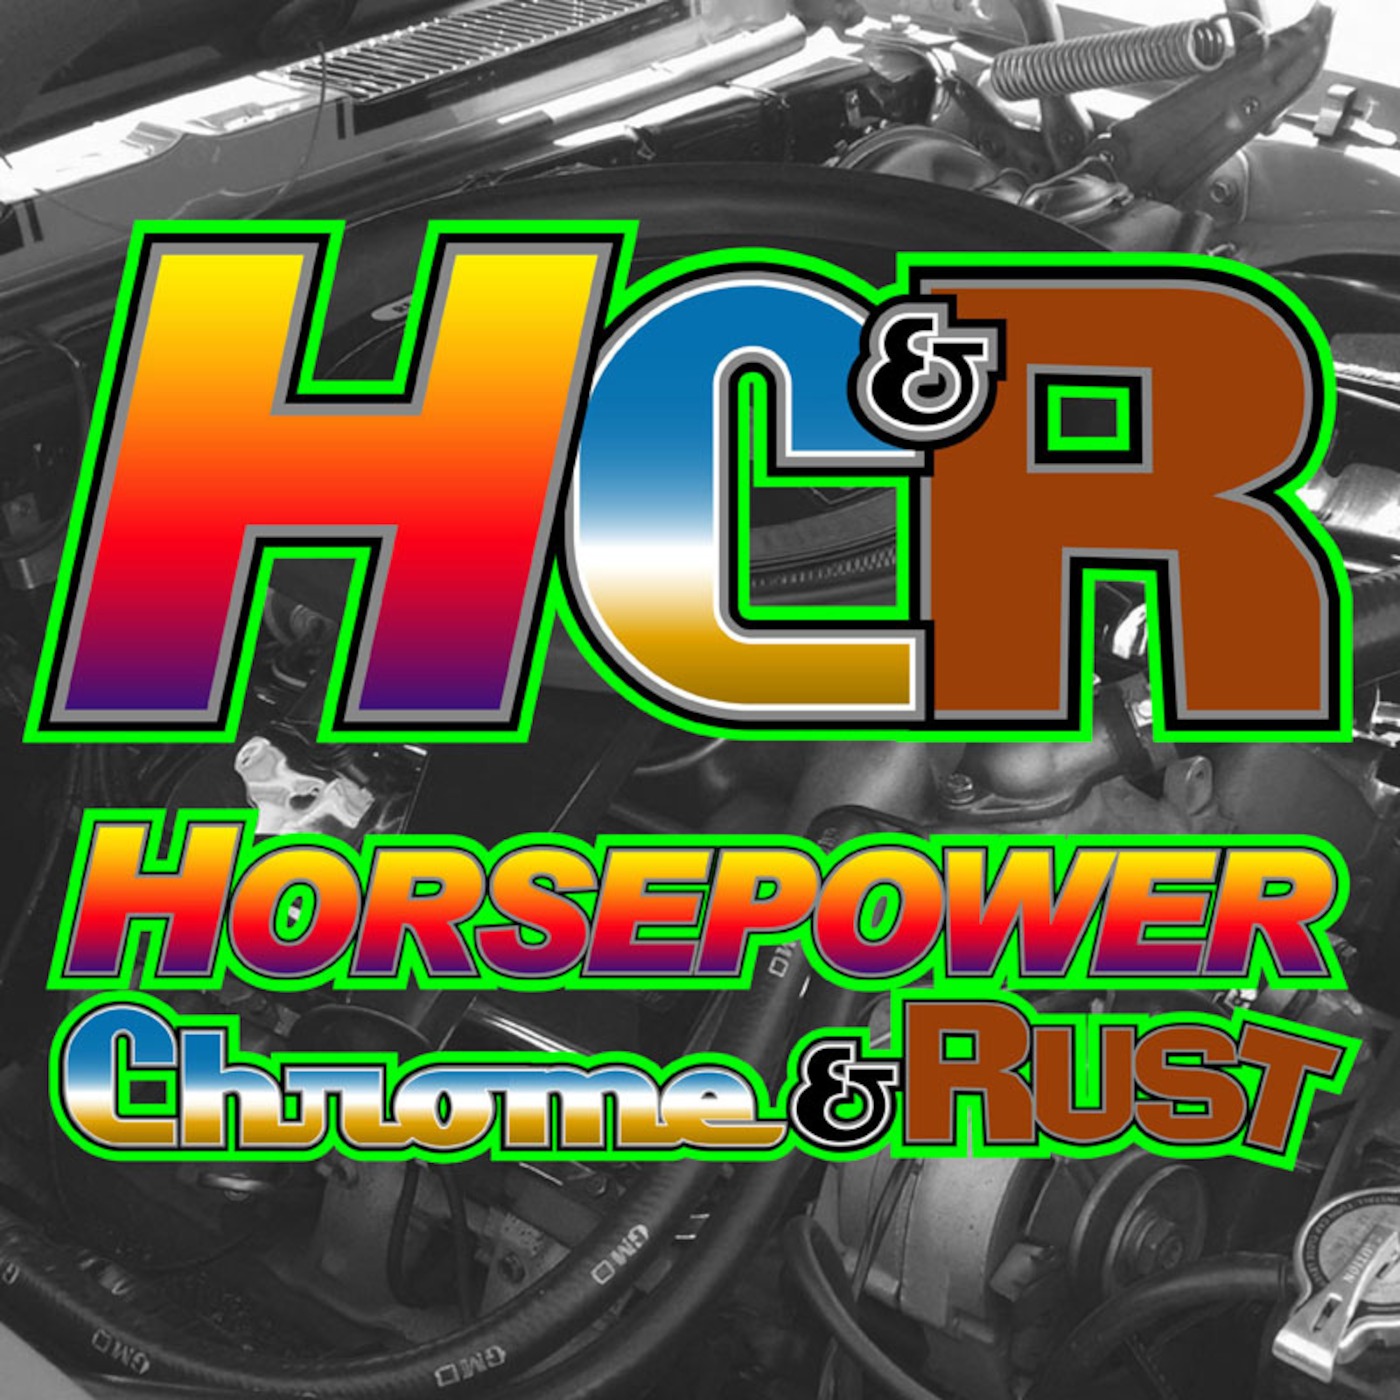 Horsepower Chrome and Rust EP99 Kevin Martin Rat Rod 1000 & More August 20 2019